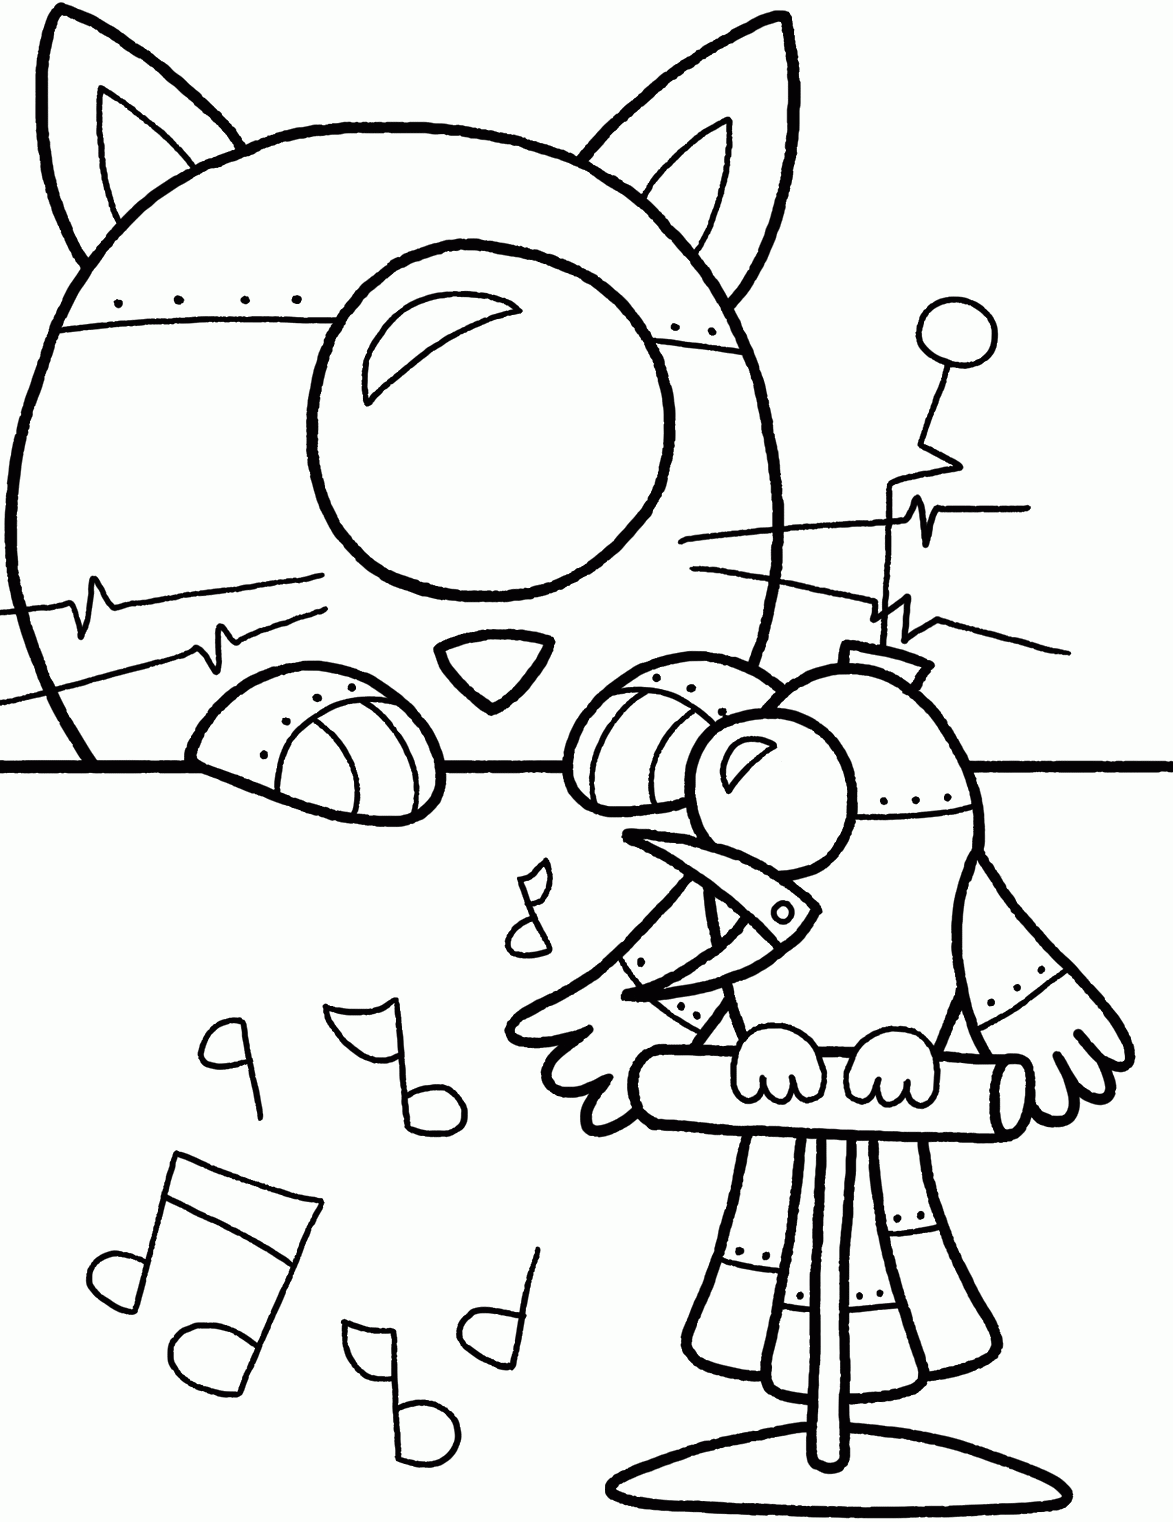 10 Pics of Robot Coloring Pages For Teens - Robot Coloring Page ...